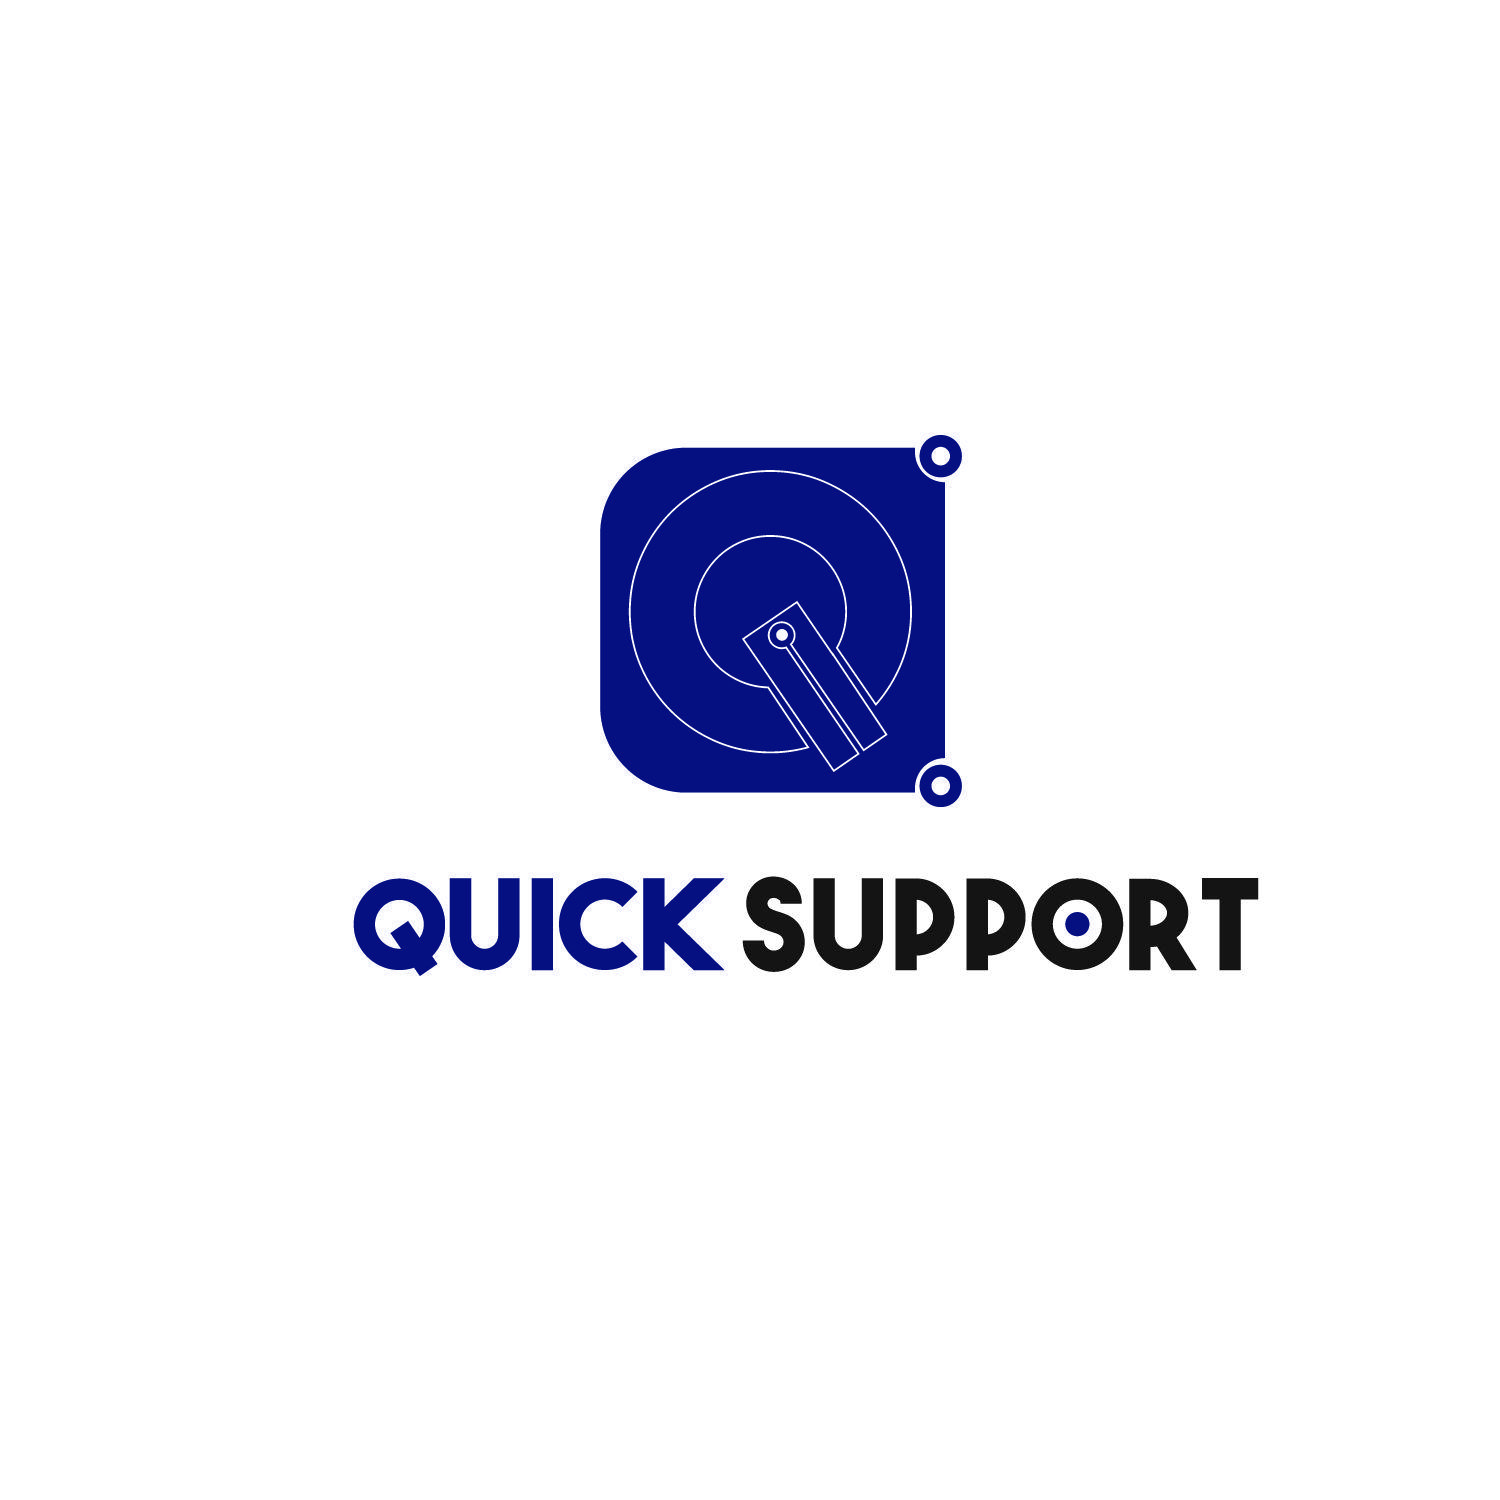 Colorful Computer Logo - Modern, Colorful, Computer Logo Design for Quick Support by bcerblin ...